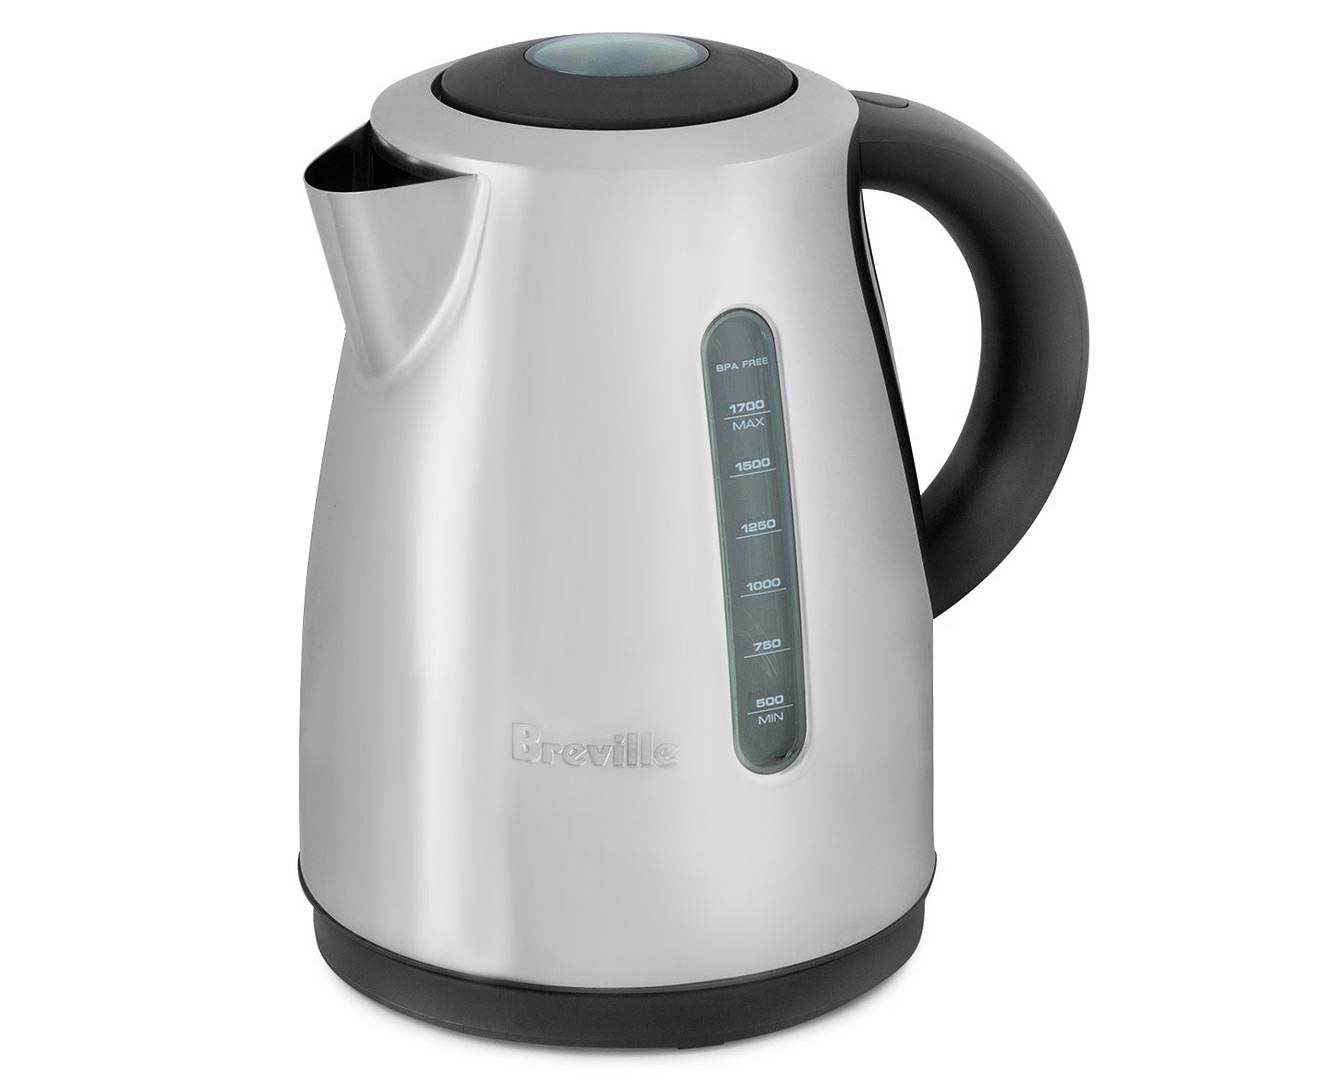 Breville 1.7L Soft Top Clear Kettle - Polished Silver